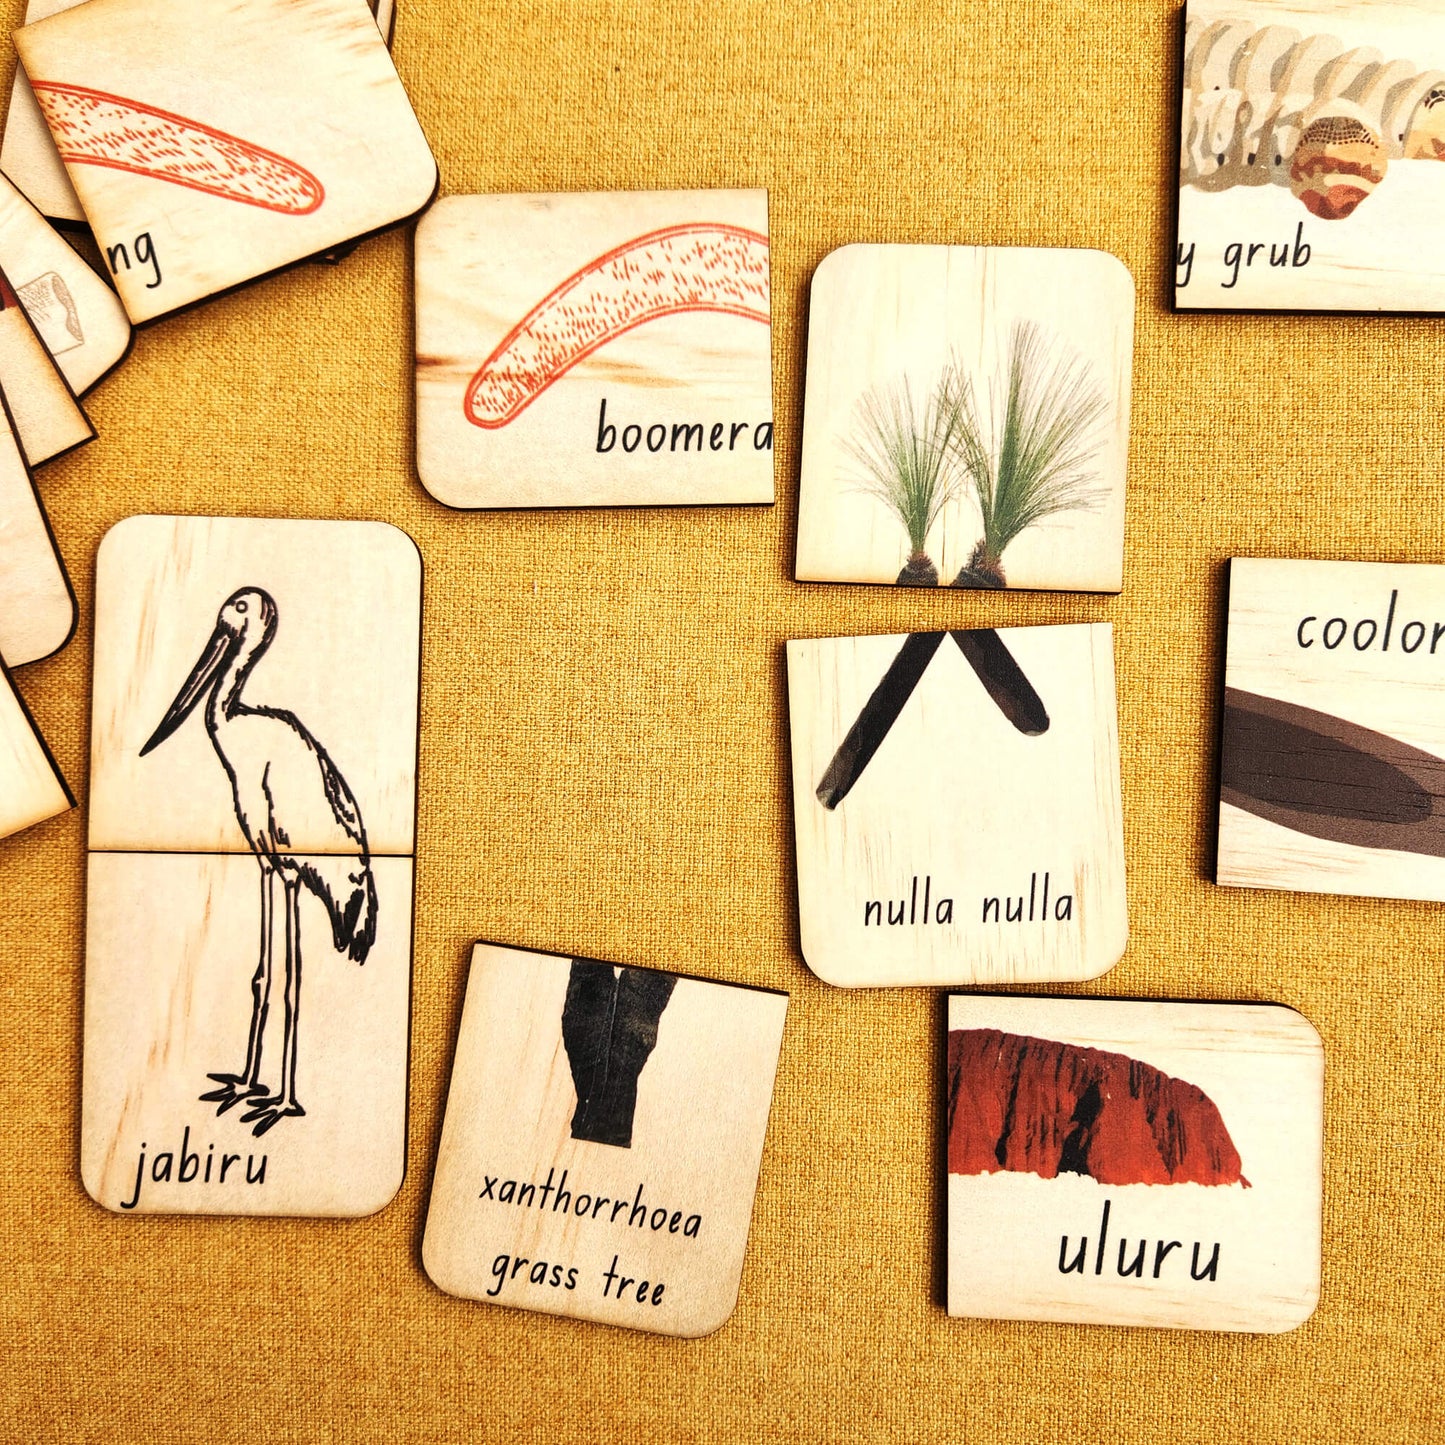 Matching game with Aboriginal images